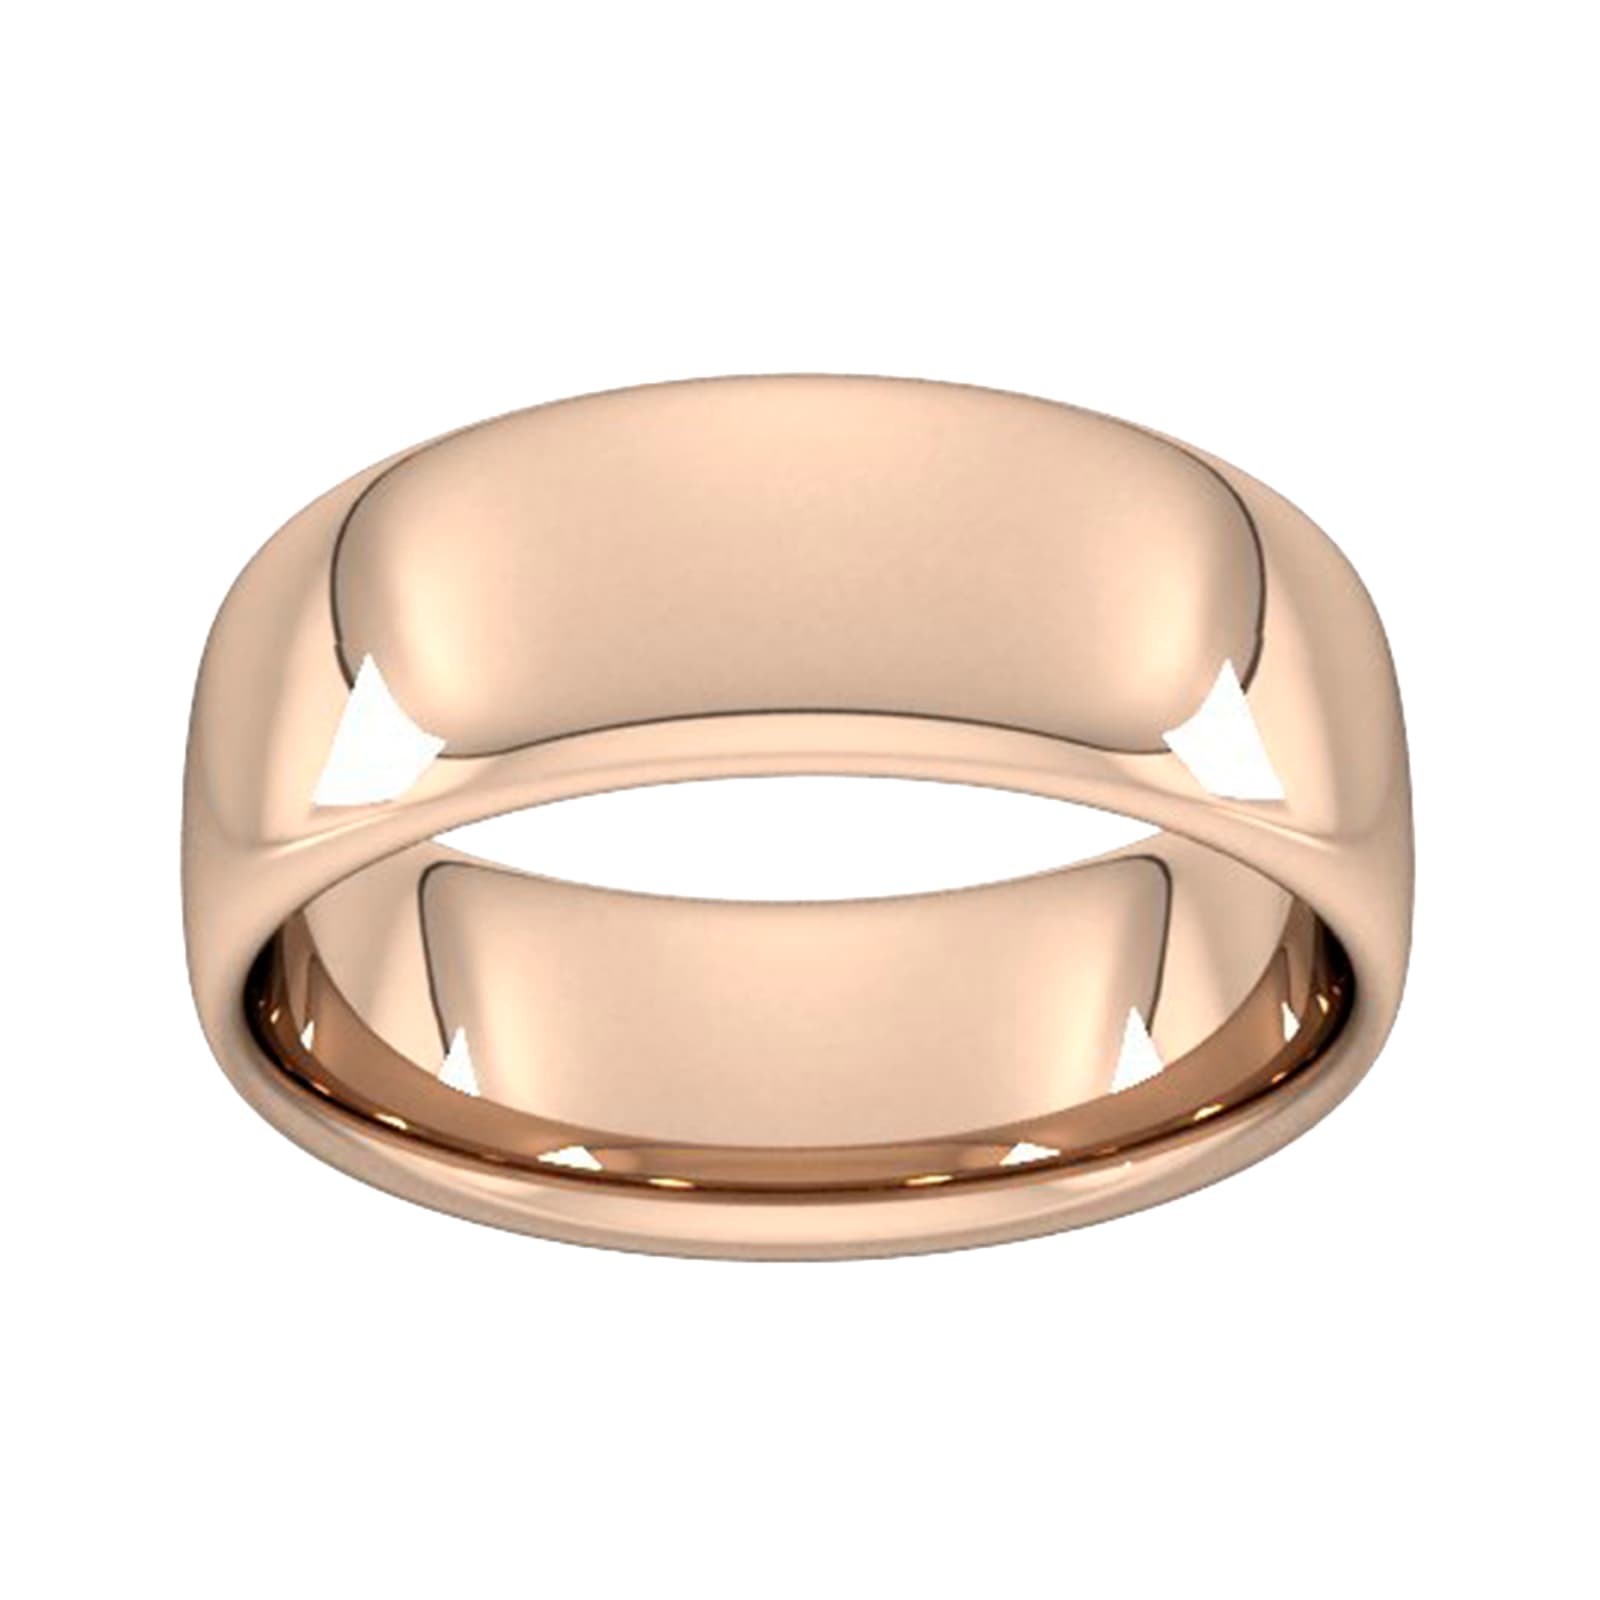 8mm Slight Court Heavy Wedding Ring In 18 Carat Rose Gold - Ring Size R